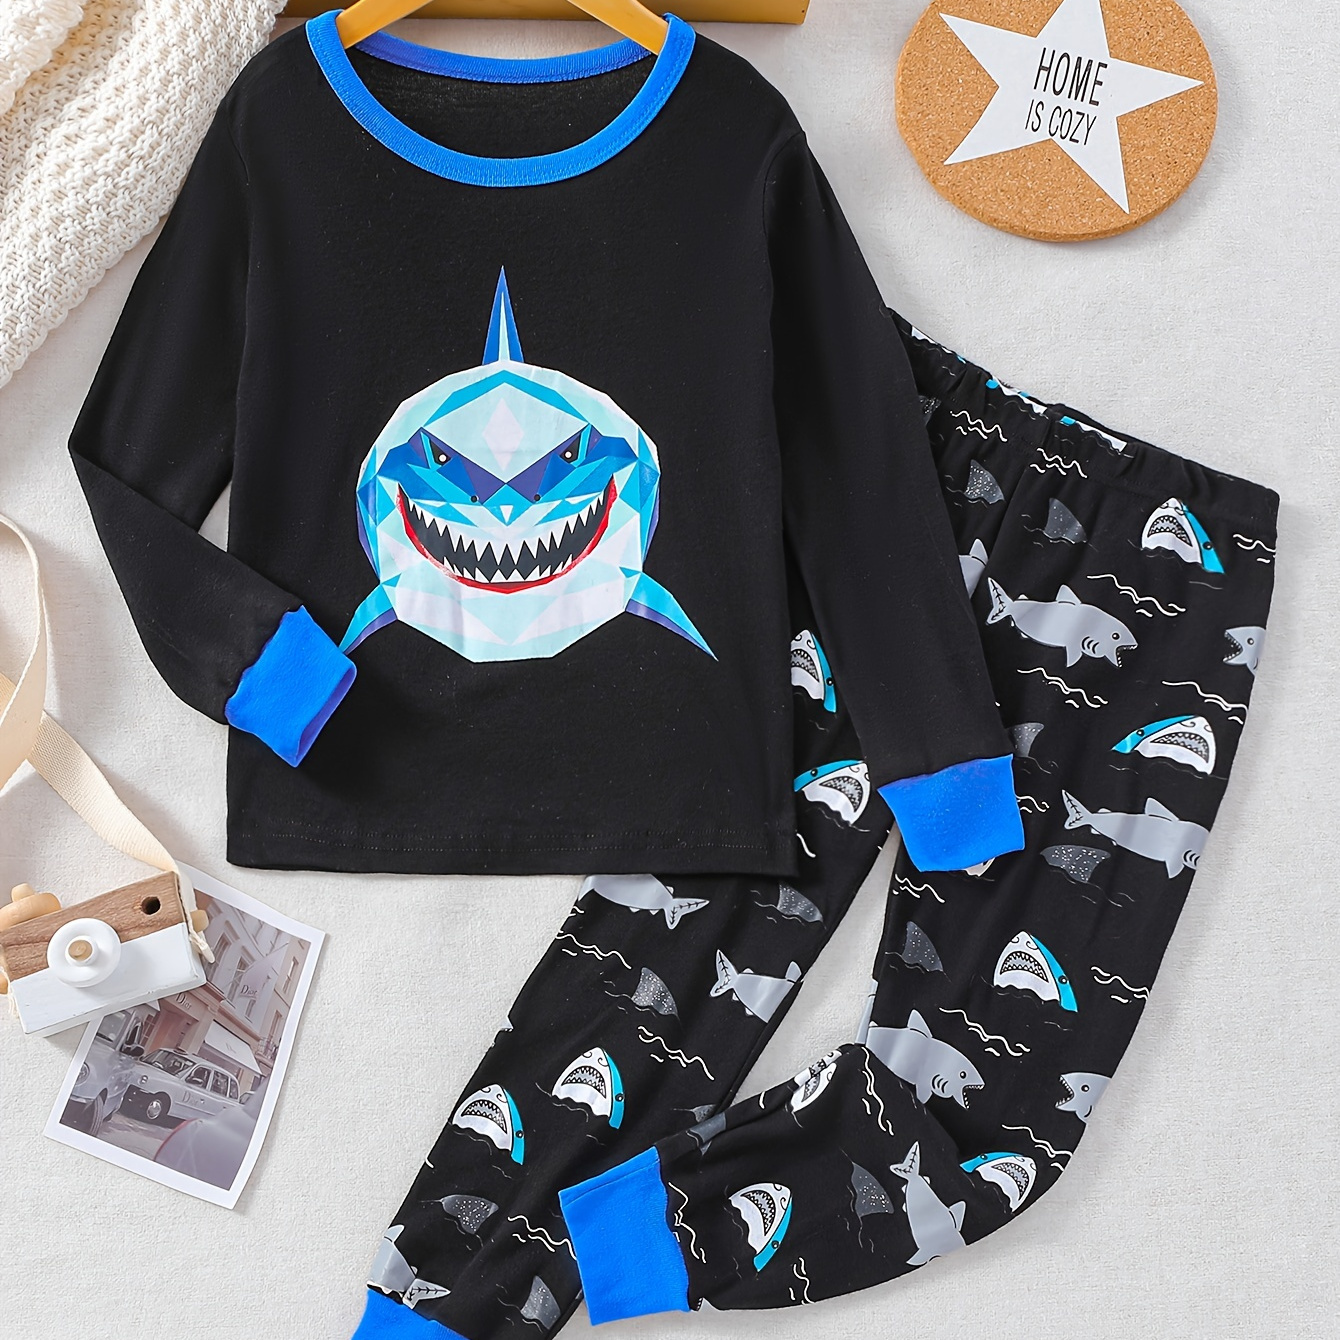 

Toddler Boys 2-piece Pajama Sets Cartoon Shark Print Round Neck Long Sleeve Top & Full Print Trousers Casual Pj Sets For All Seasons